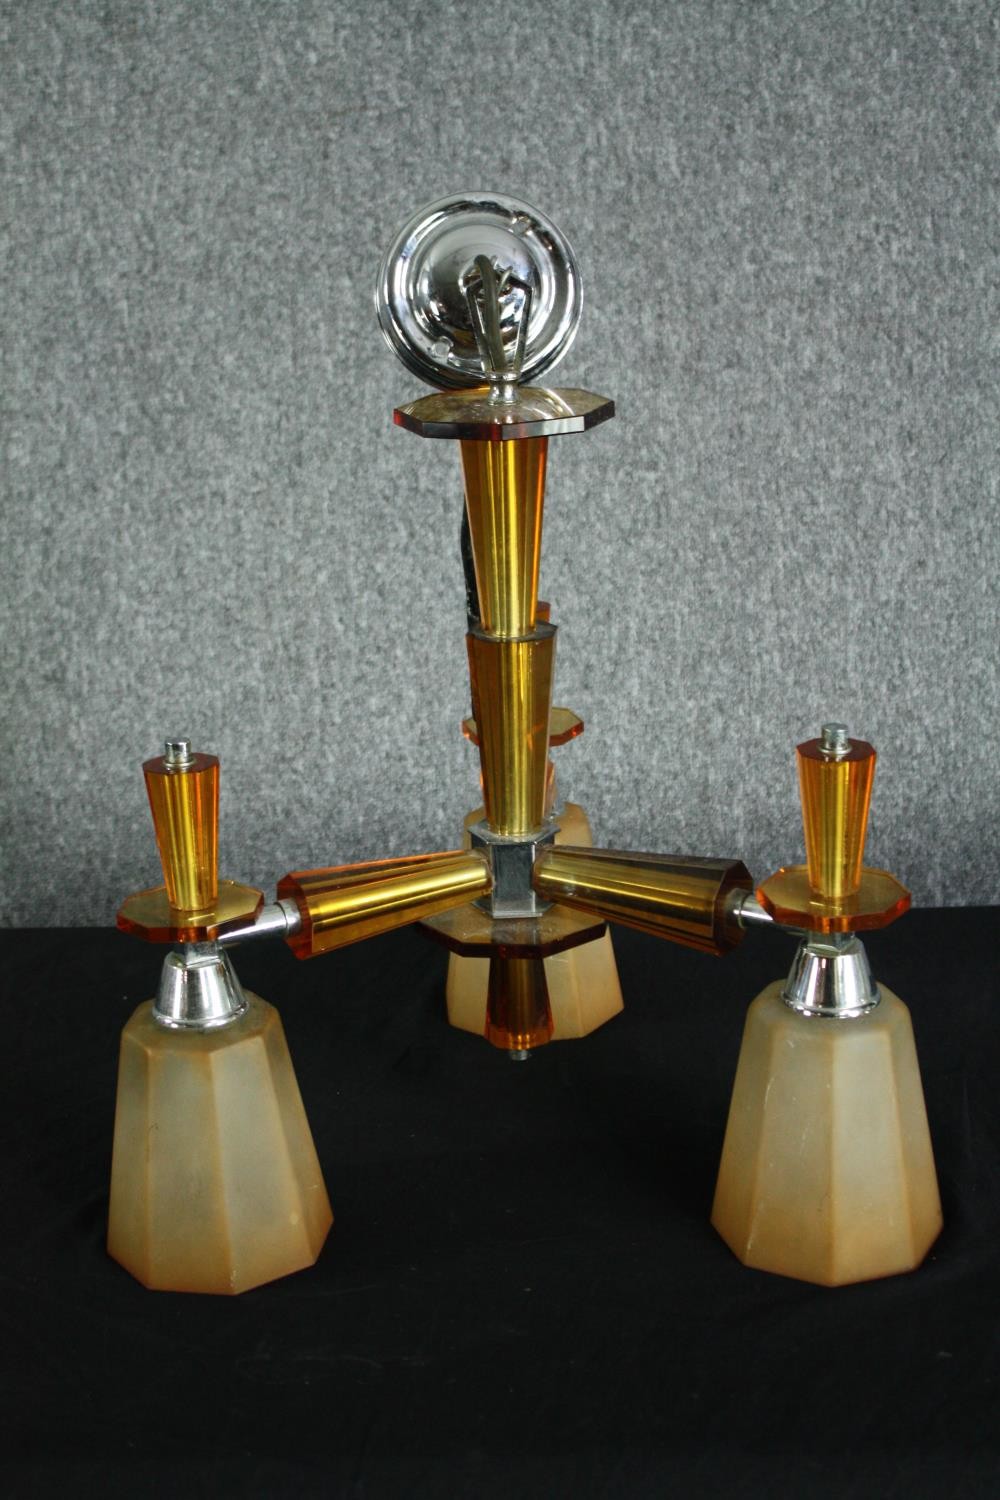 A 1930s Art Deco chandelier. Chromed metal with orange glass surrounds and three branches of - Image 2 of 7